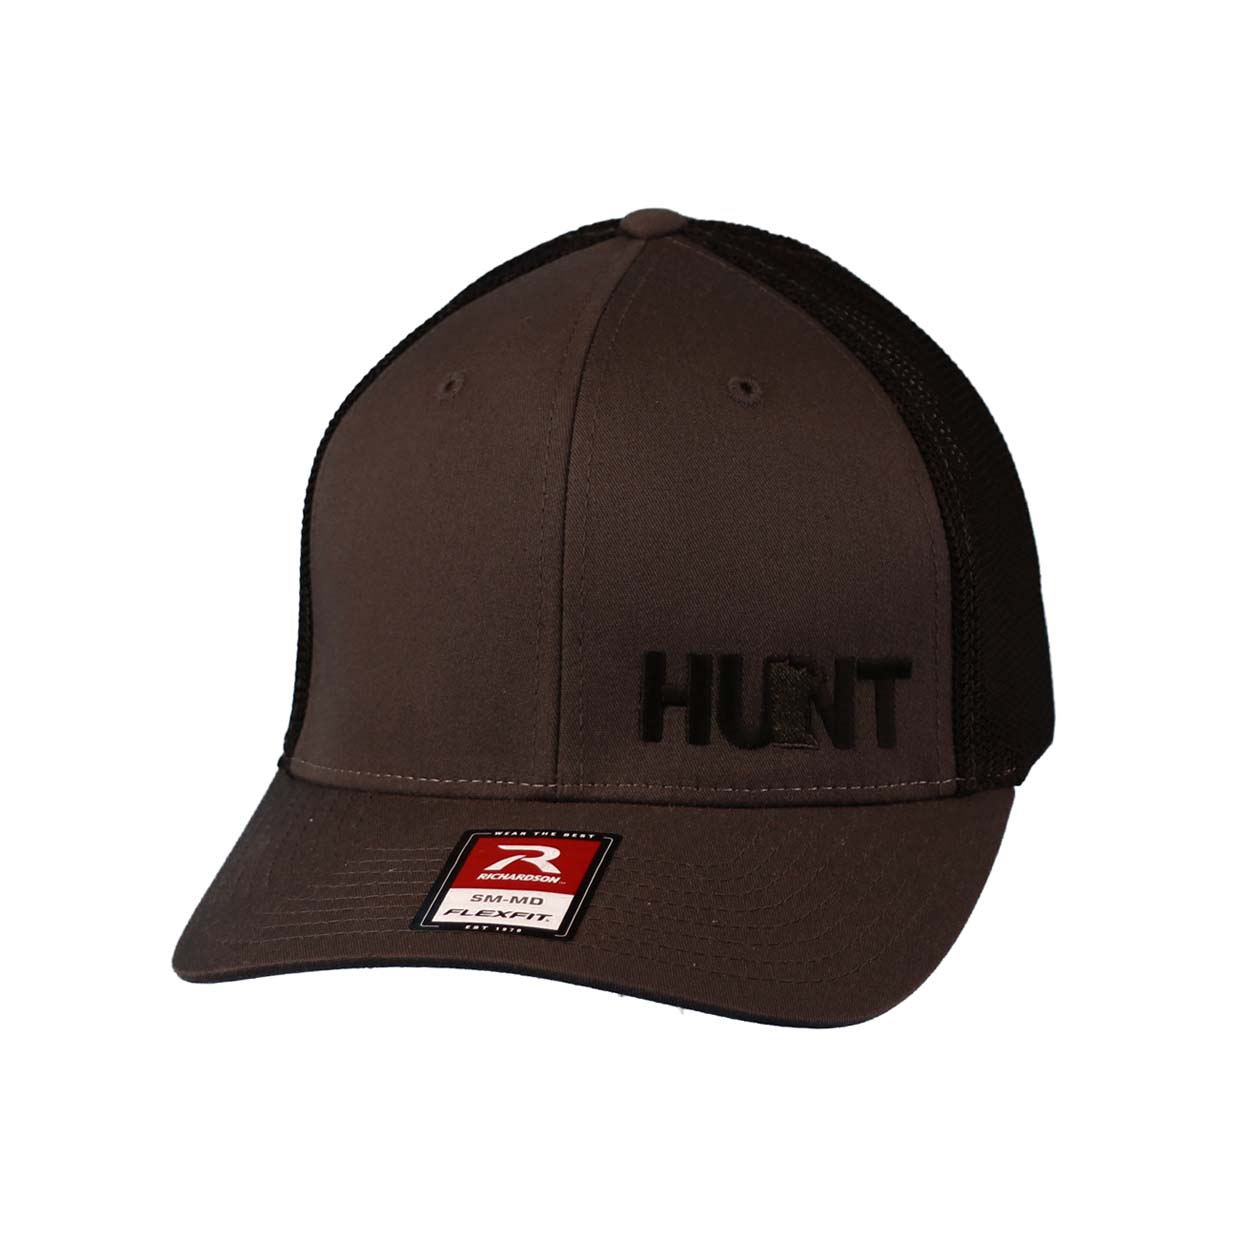 Hunt Minnesota Night Out Embroidered Flex Fit Mesh Hat Gray/Black